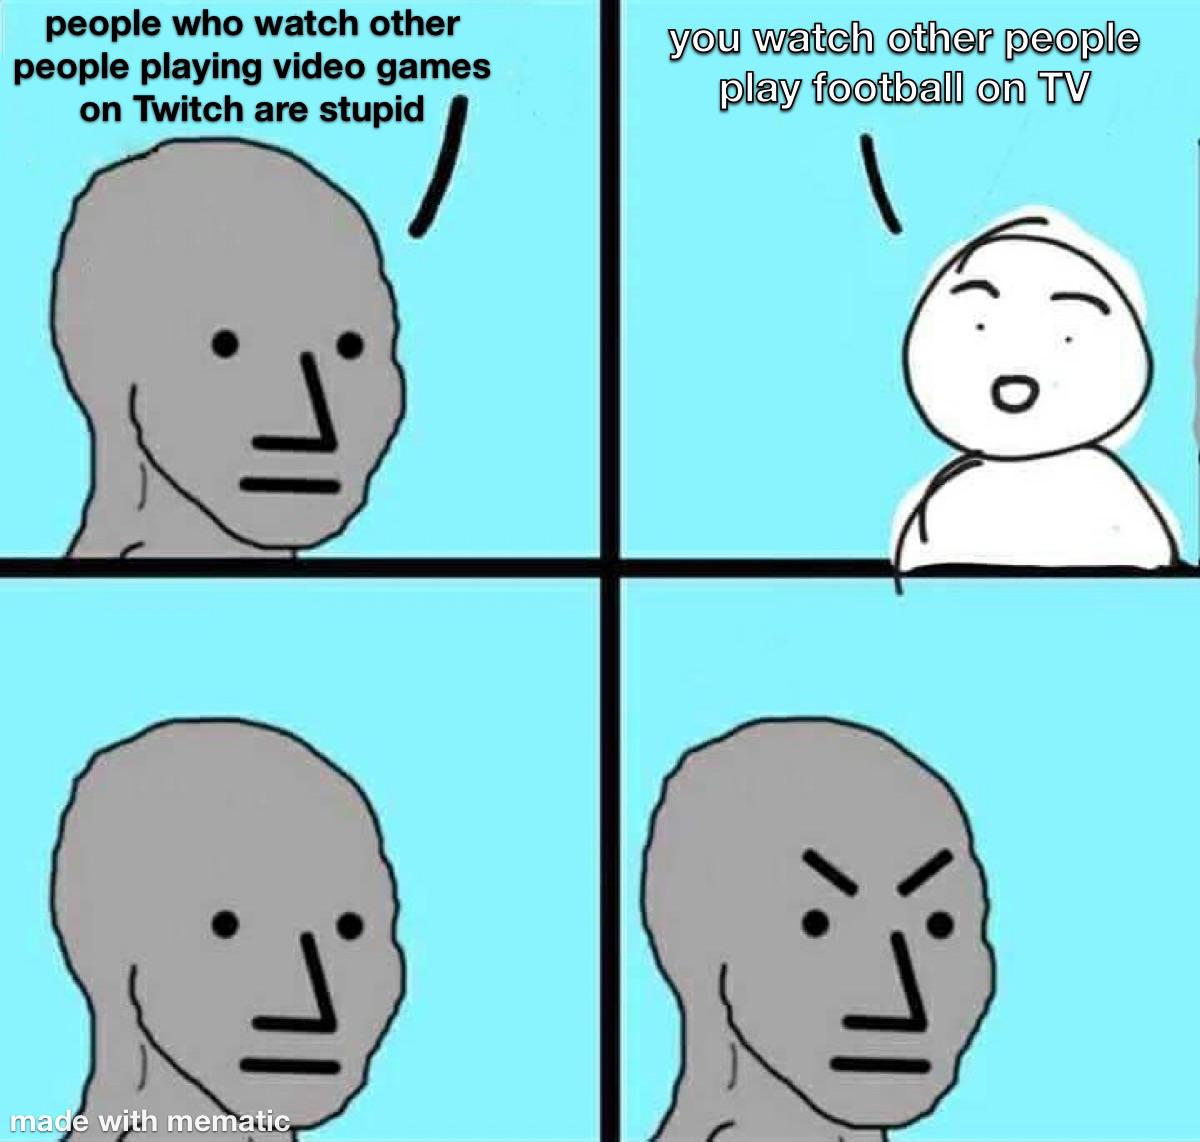 but meme - people who watch other people playing video games on Twitch are stupid you watch other people play football on Tv o made with mematic